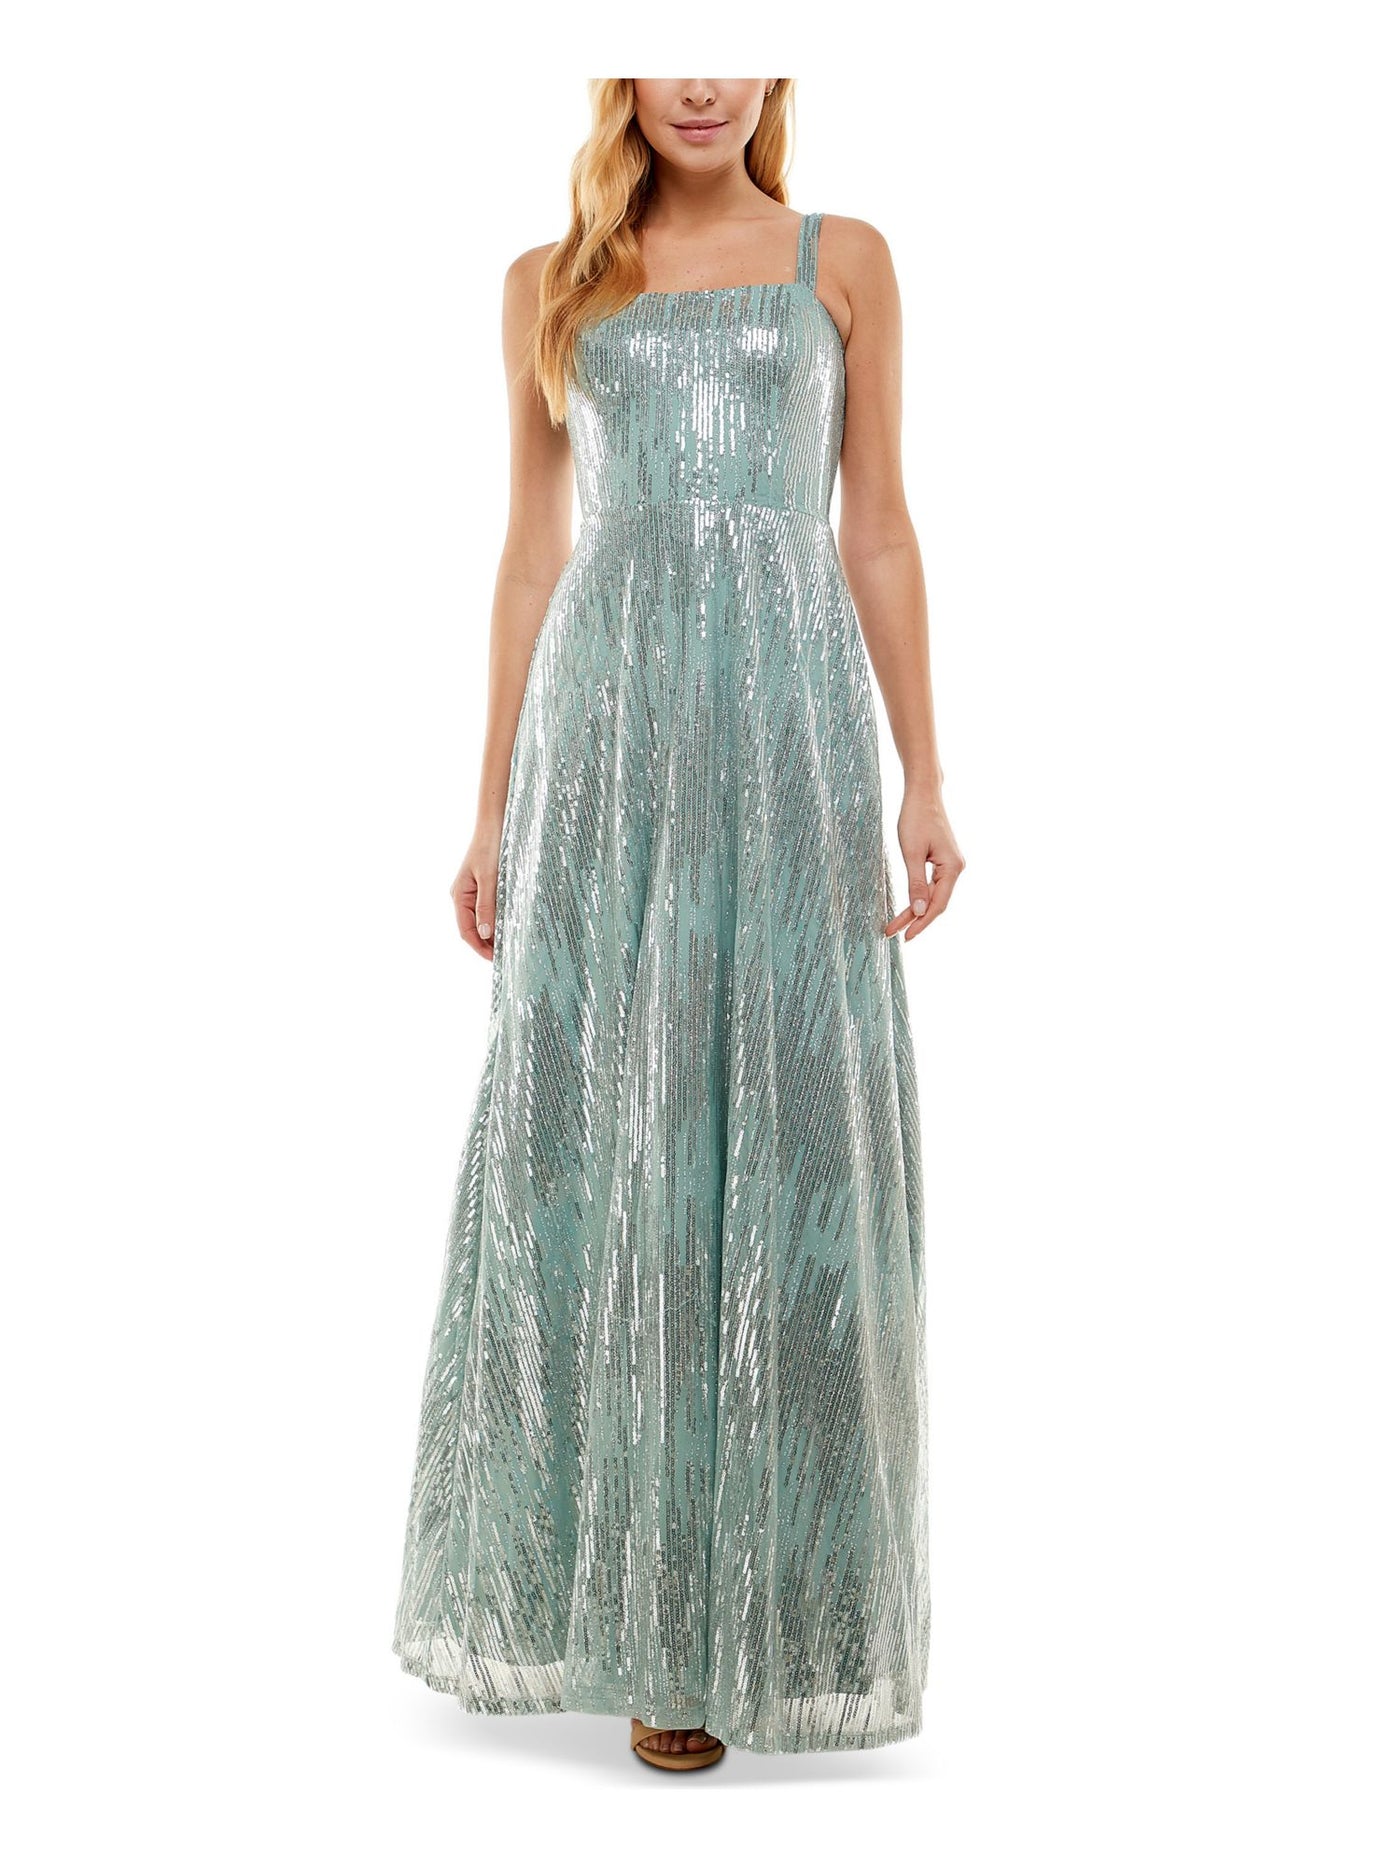 SAY YES TO THE PROM Womens Green Sequined Zippered Lined Sleeveless Square Neck Full-Length Formal Gown Dress Juniors 1